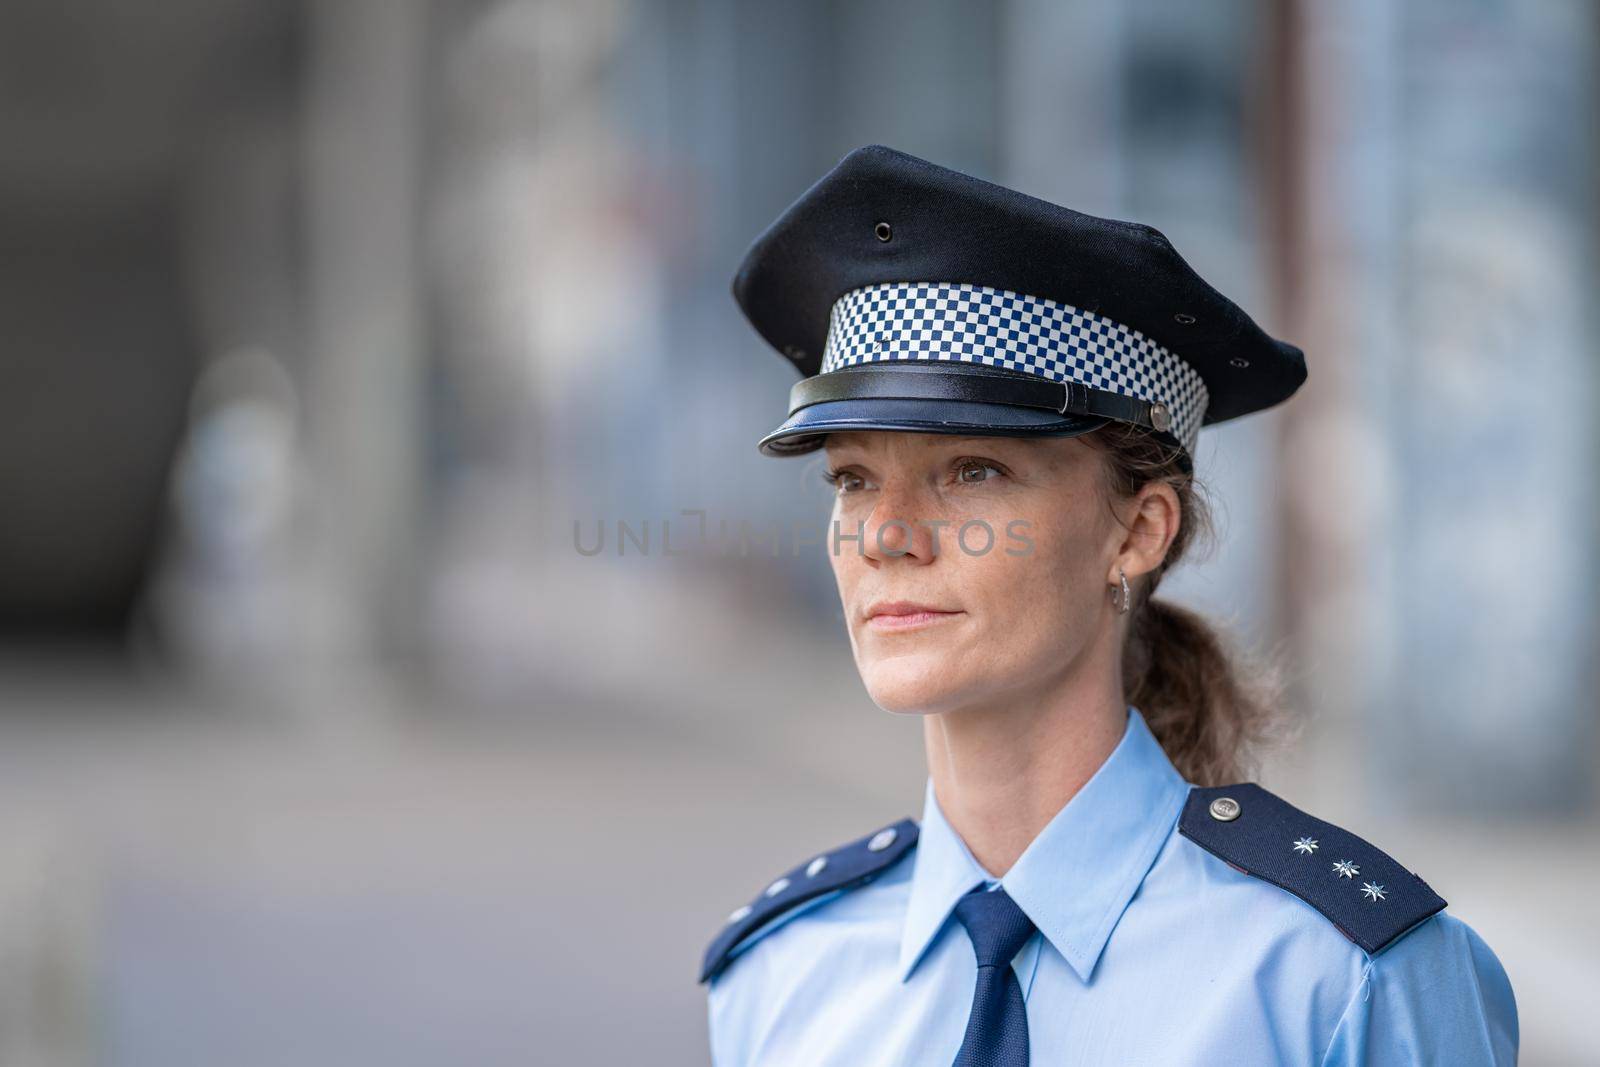 portrait of a young female policewoman in uniform.